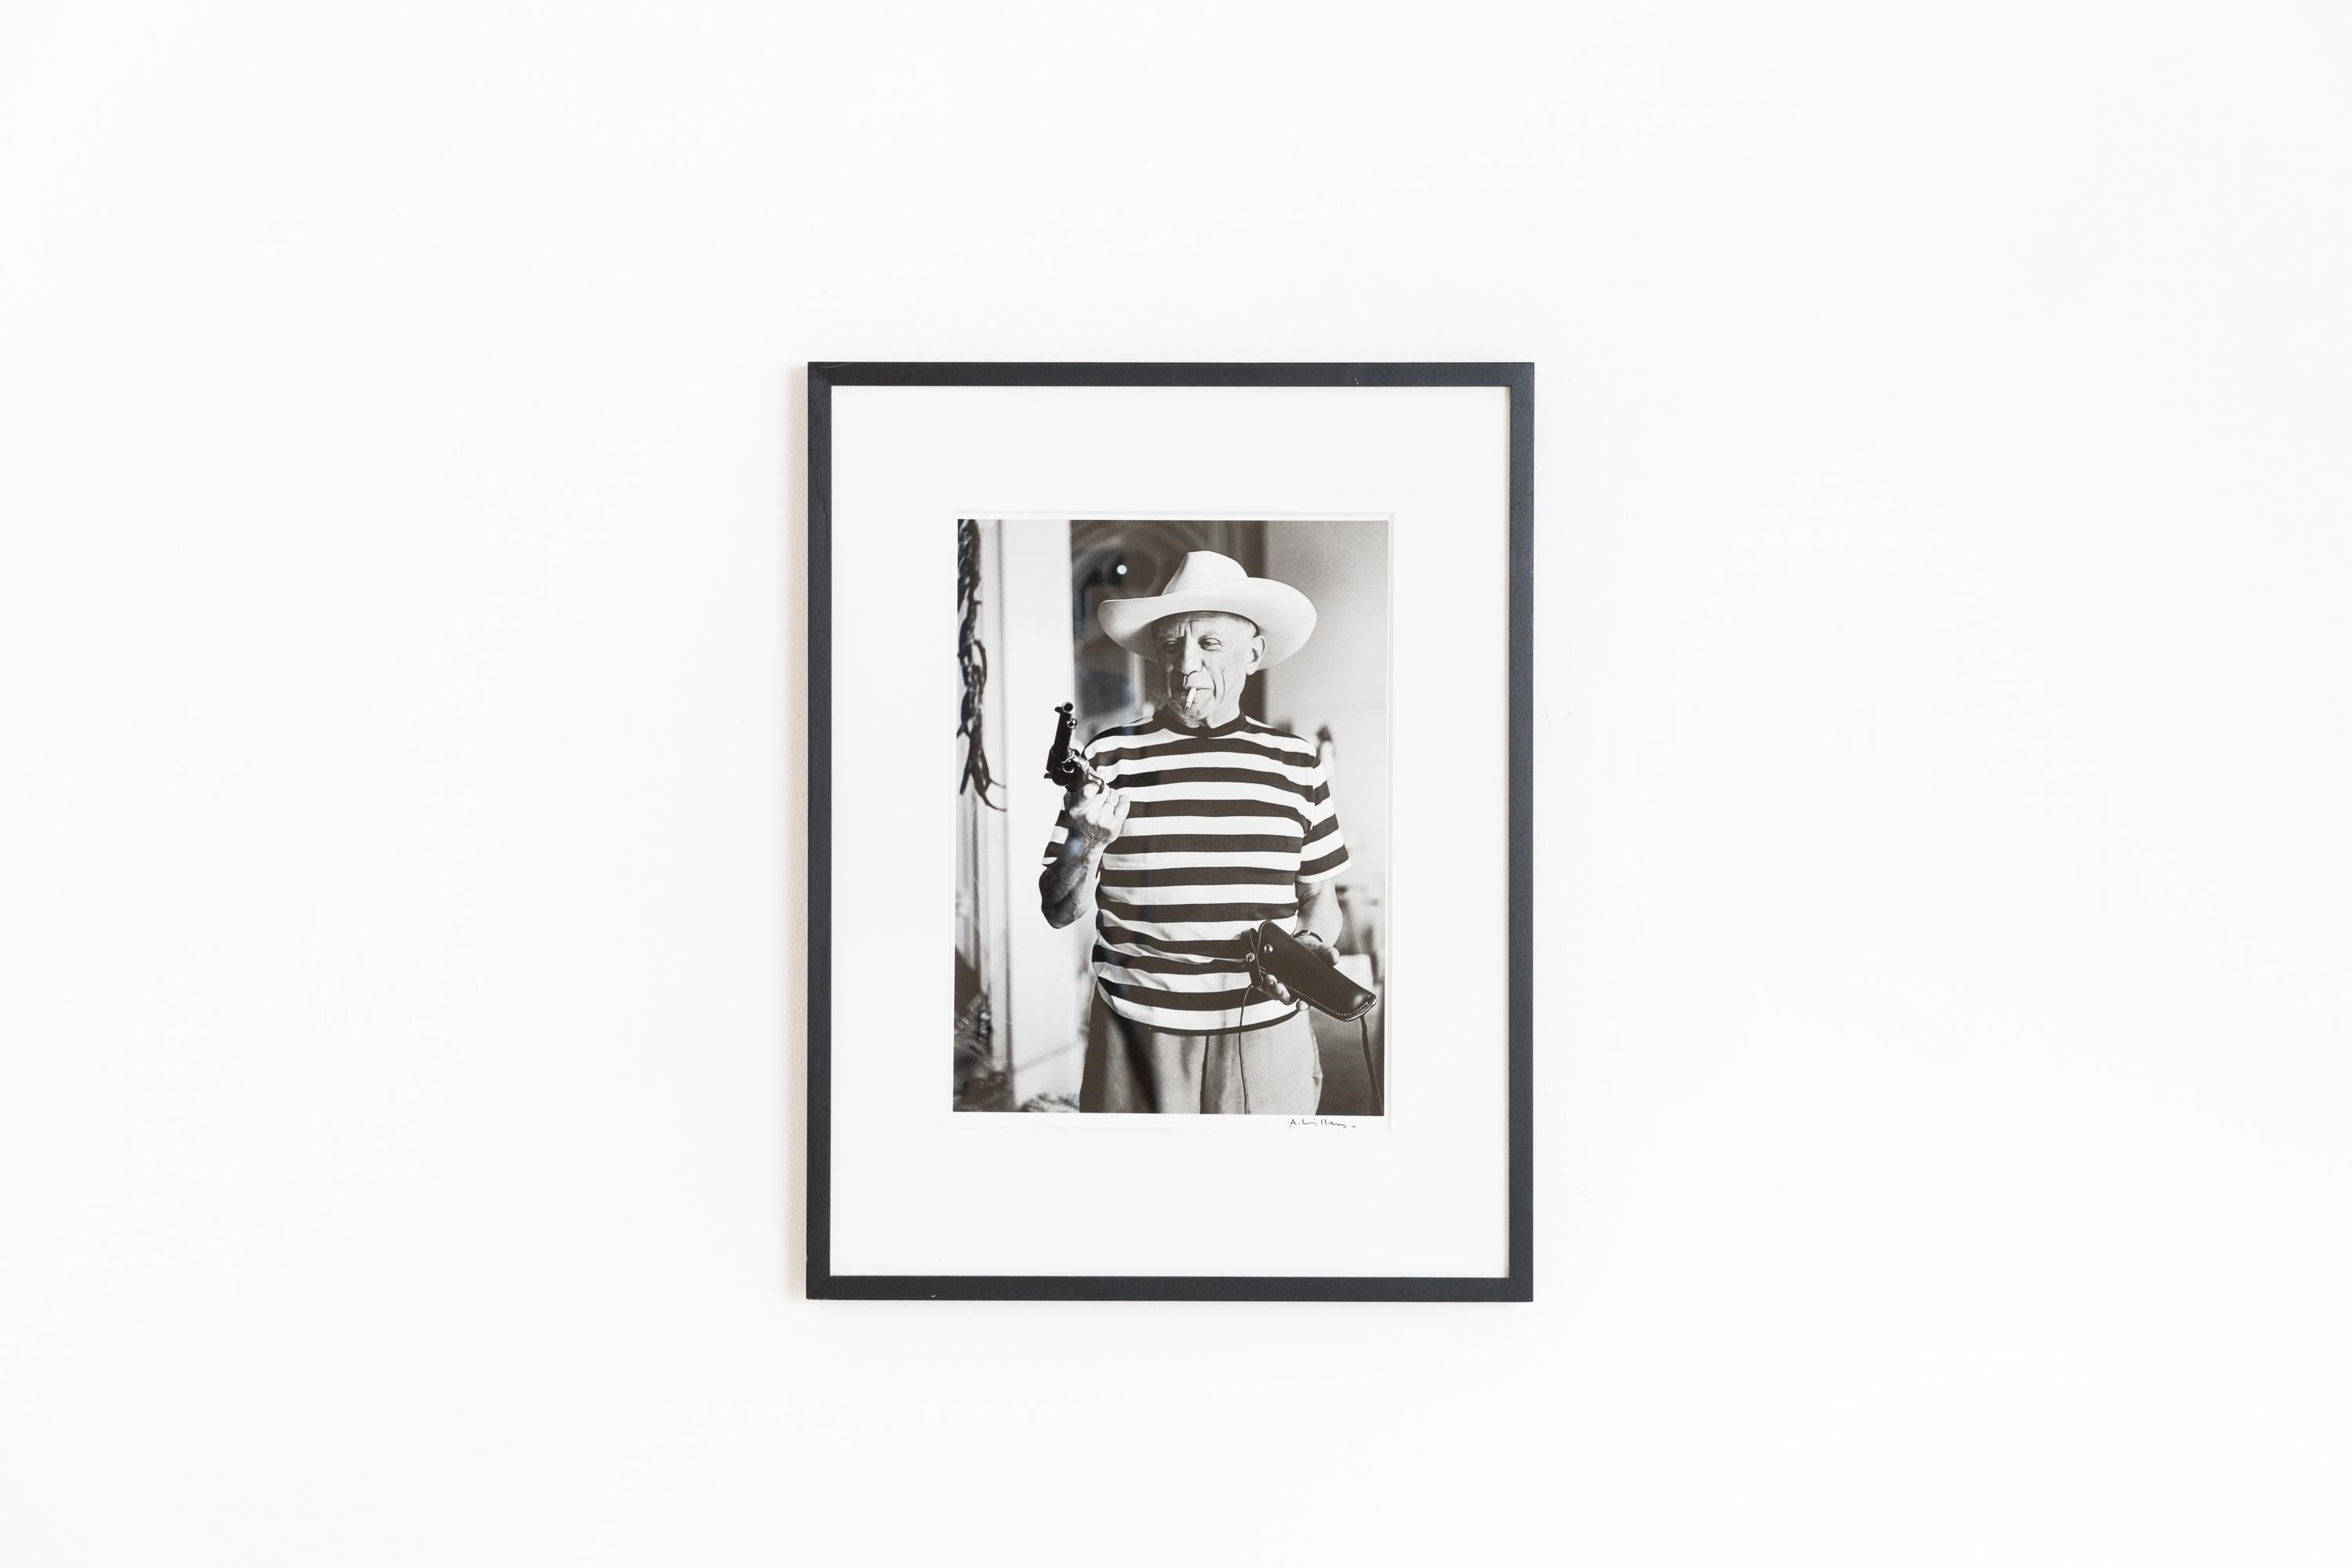 Famos Picasso - Portrait by André Villers, with the gun and hat, signed, original silver print. 
The gun, with which André Villers photographed Picasso here, was a gift from Gary Cooper to Picasso. Gary Cooper and his family (wife and daughter Mary